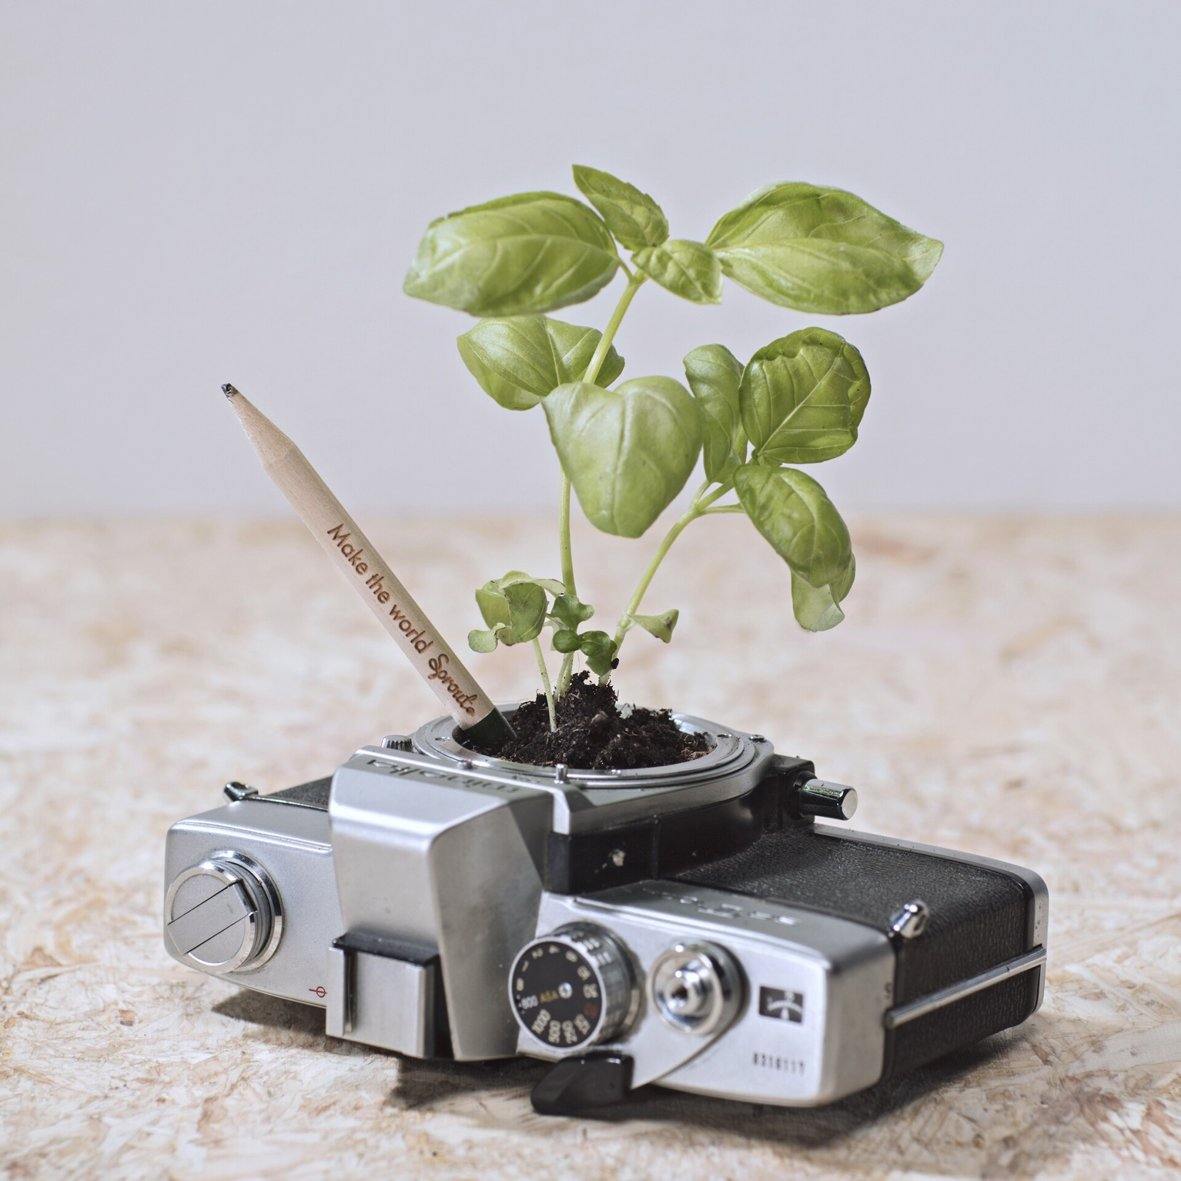 Sprout BloomYourMessage Growing Pencil in Camera display